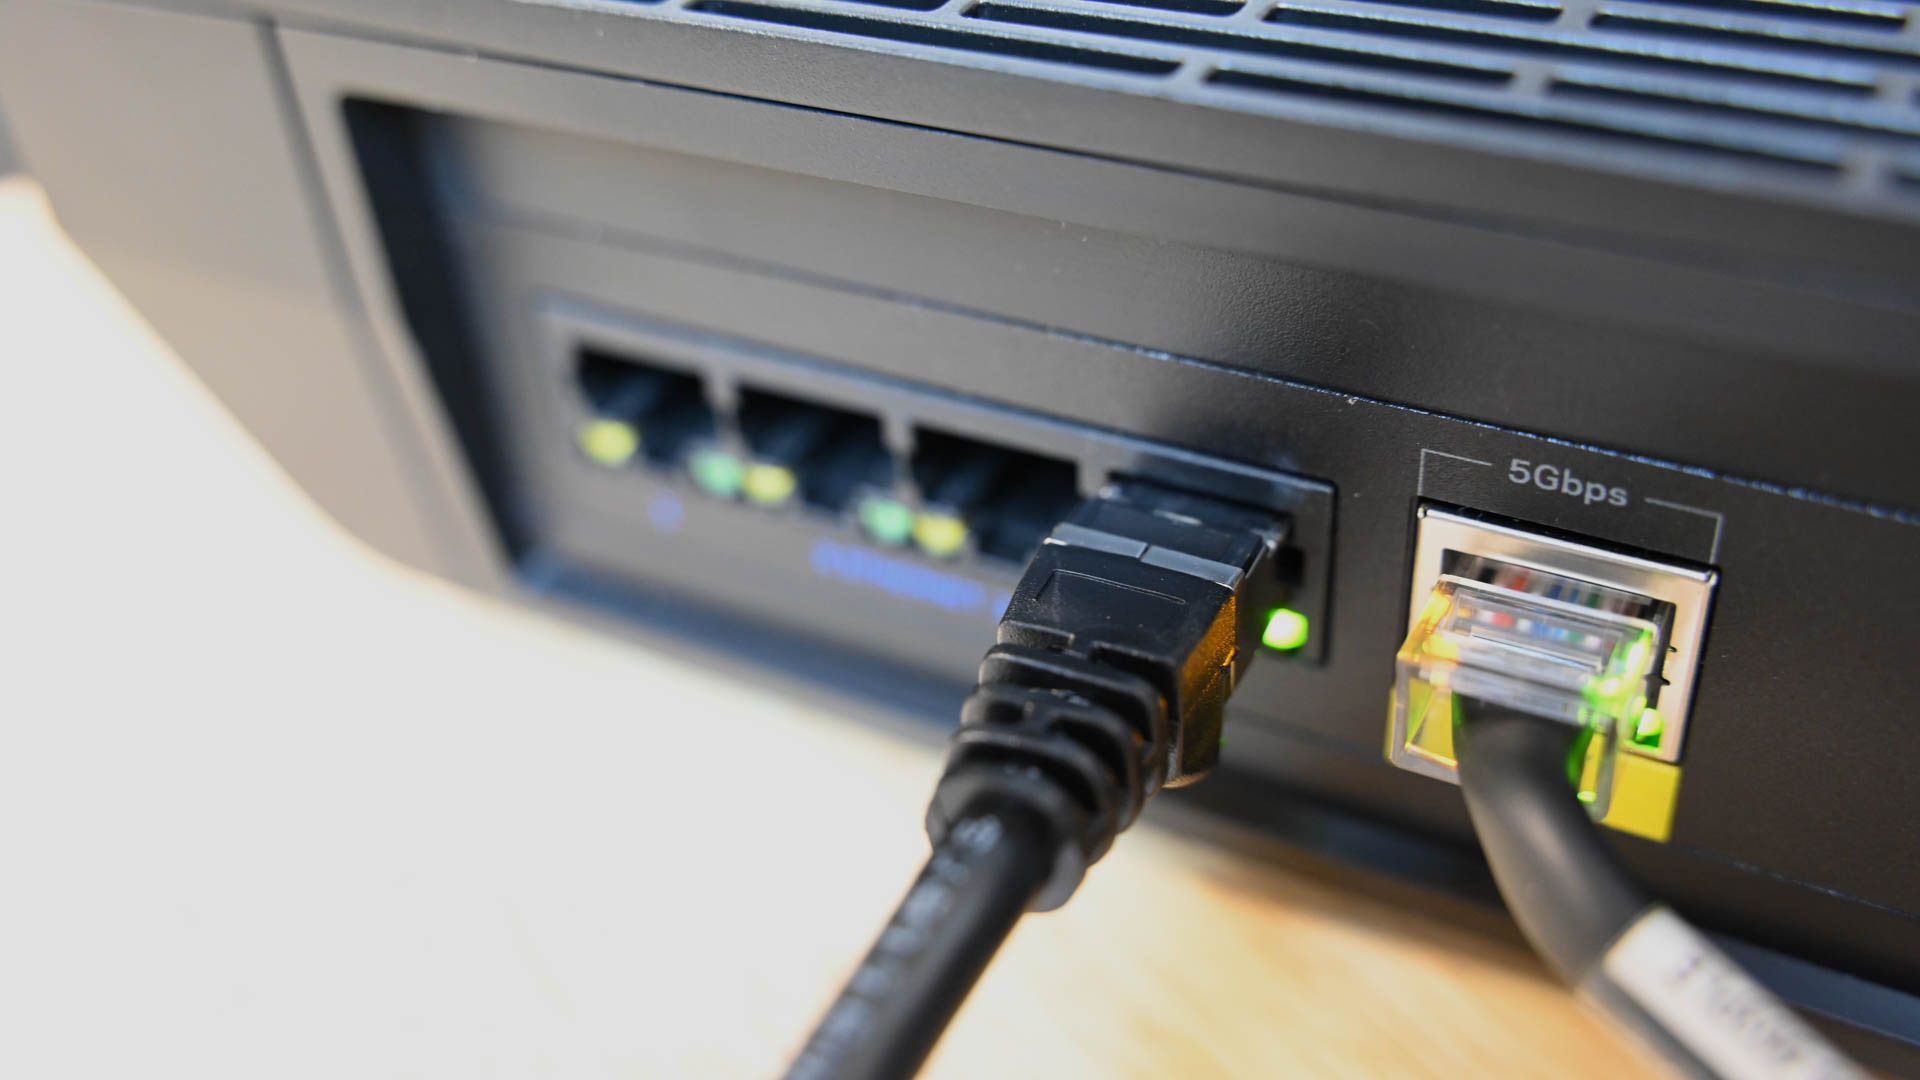 A home internet router with an Ethernet cable plugged in.